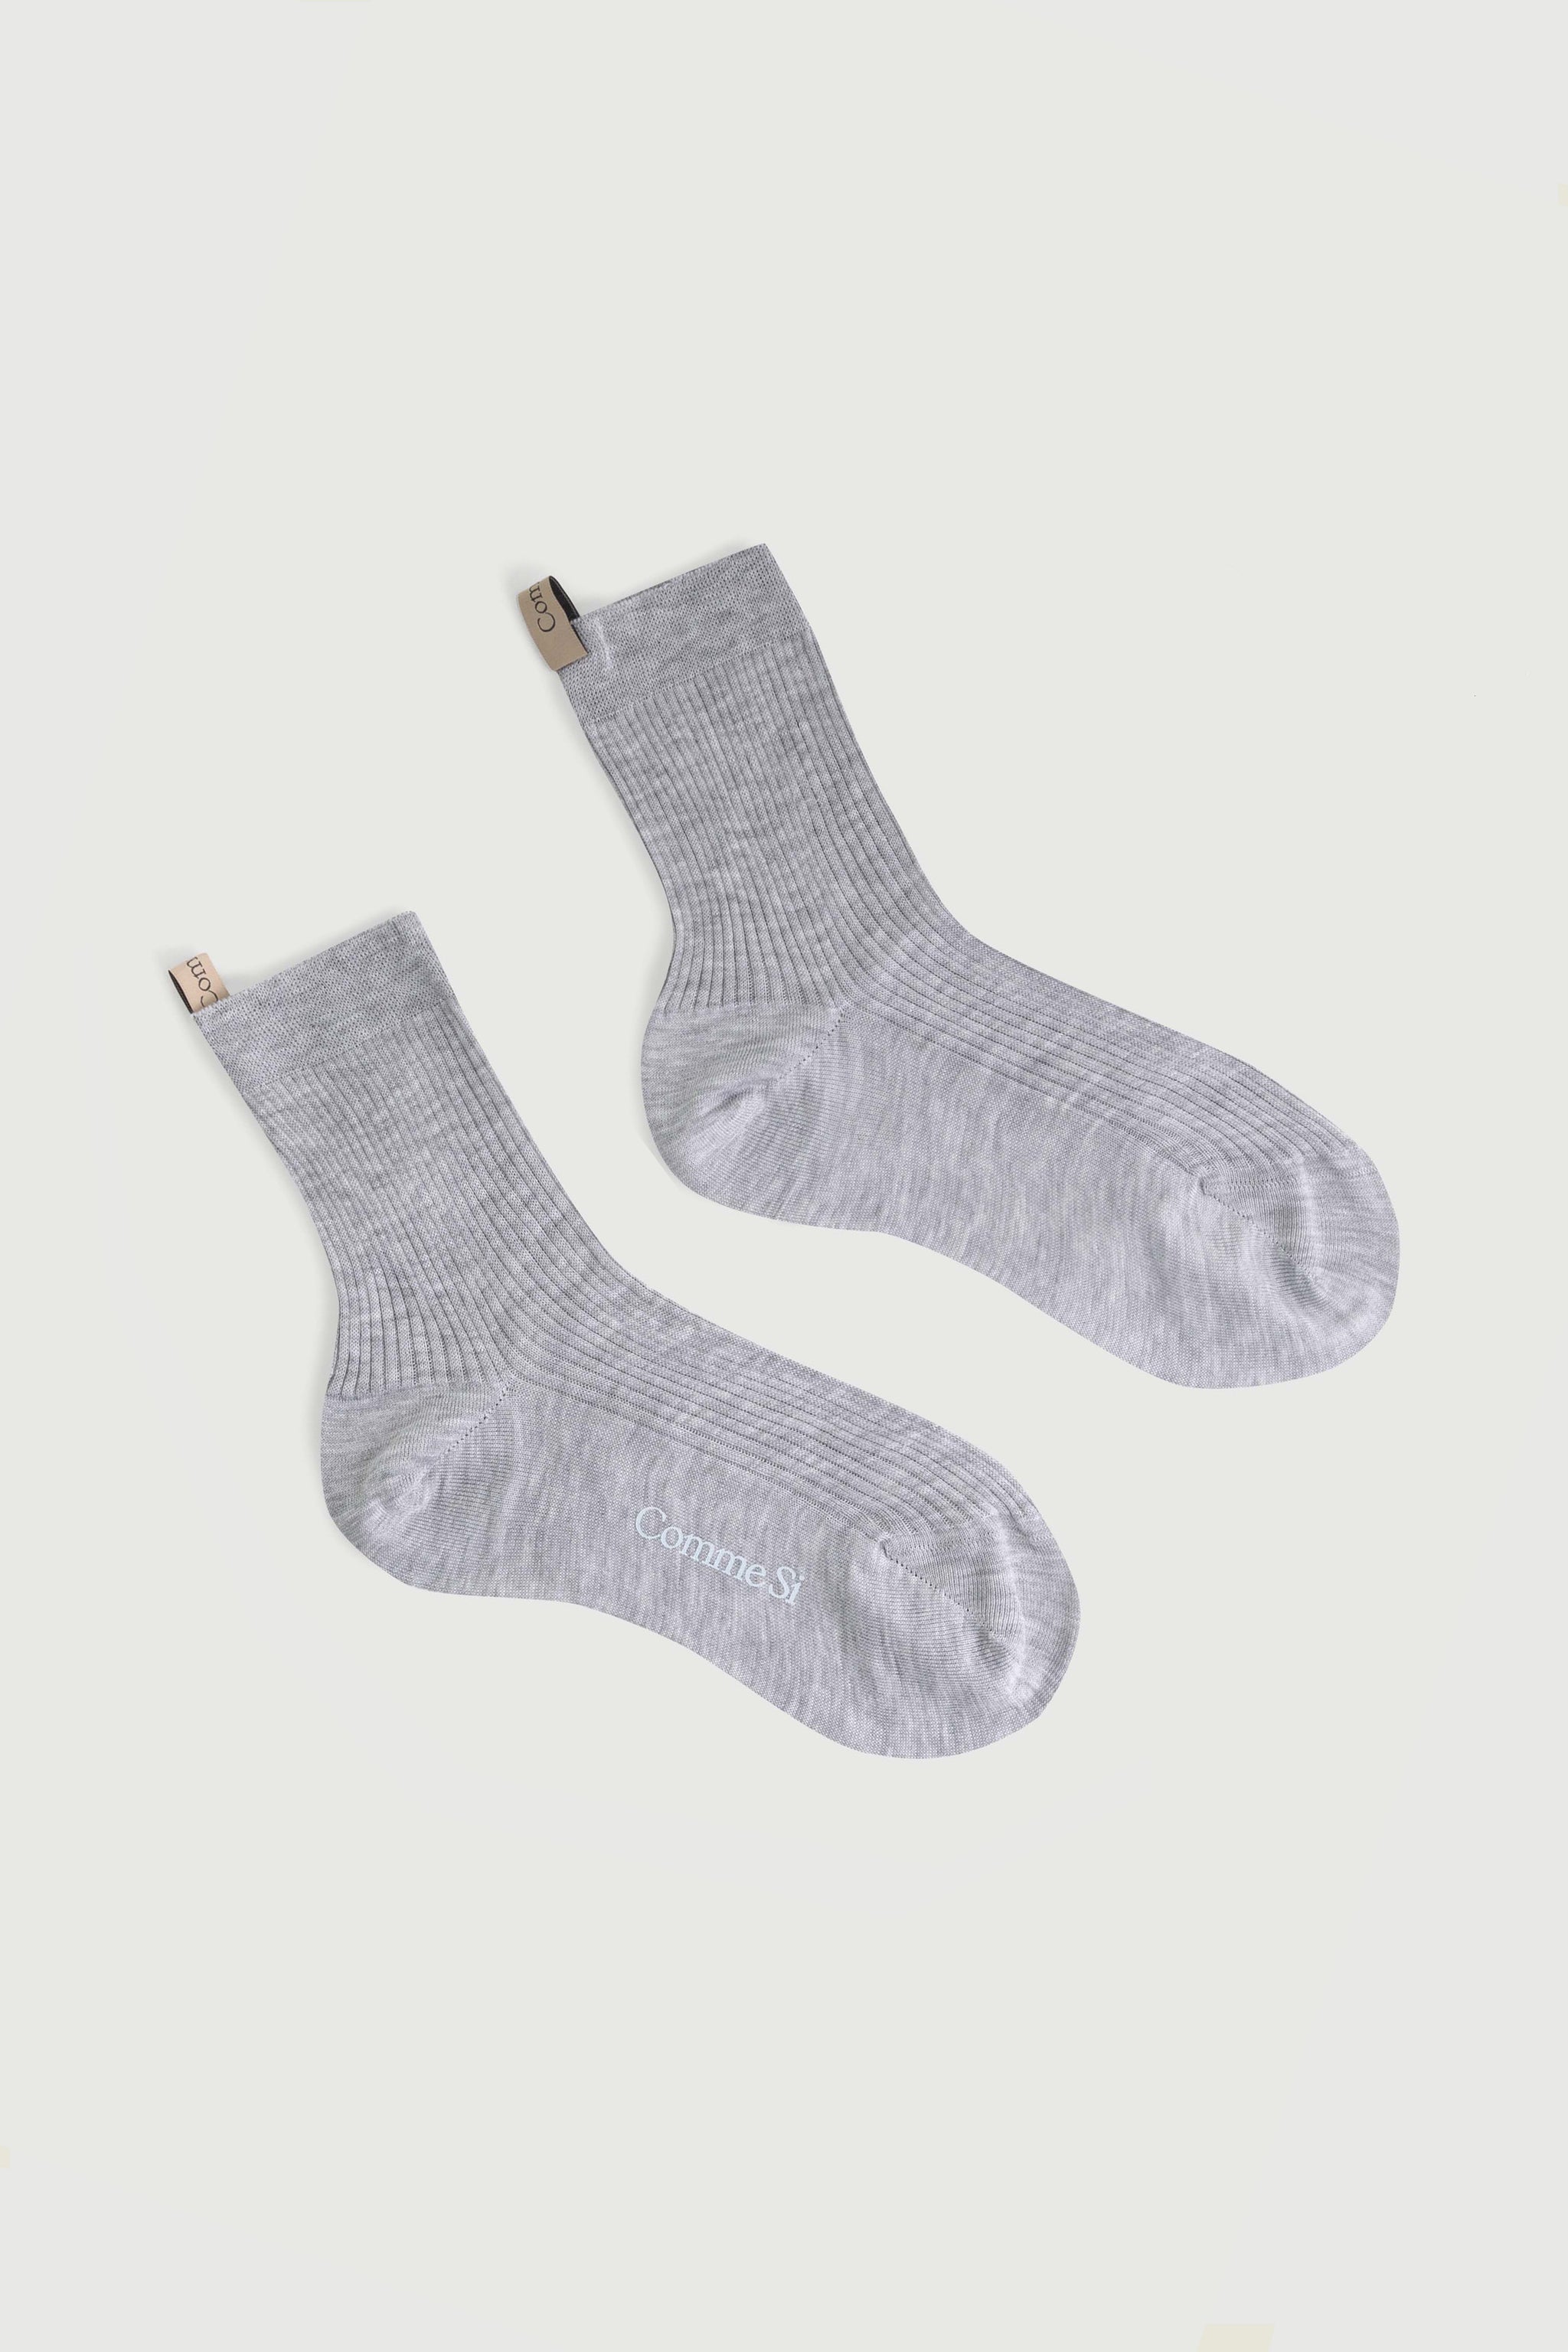 The Agnelli Sock in Light Heather Grey, Egyptian Cotton